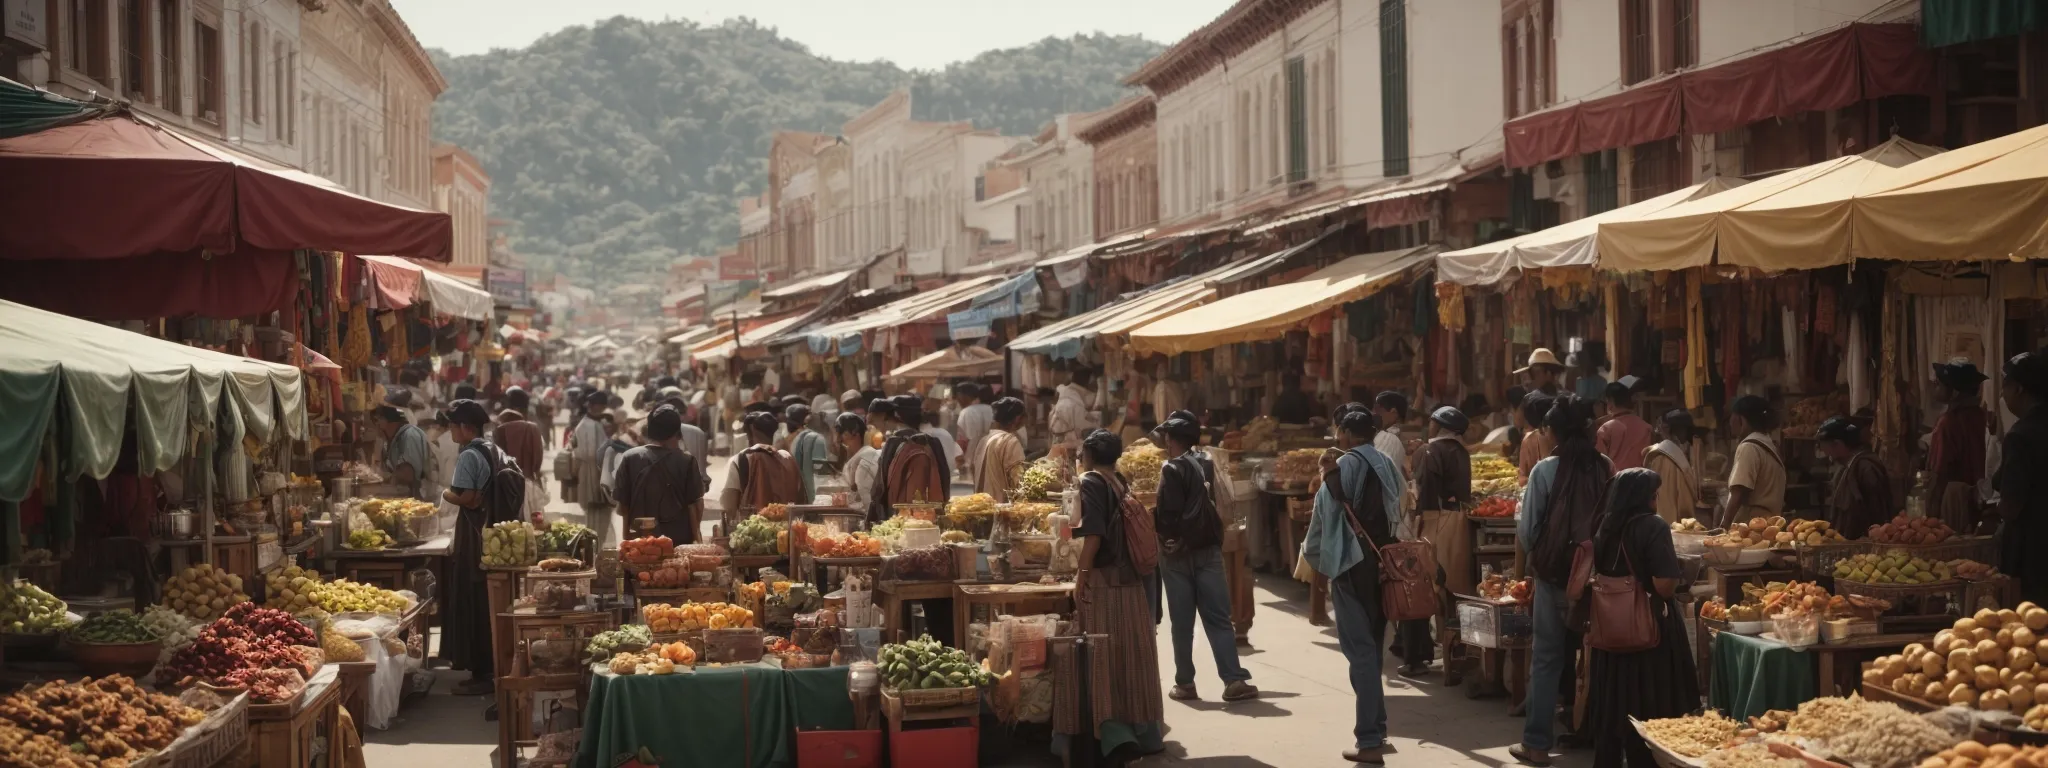 a bustling, diverse street market in a small town with various local shops showcasing their products.